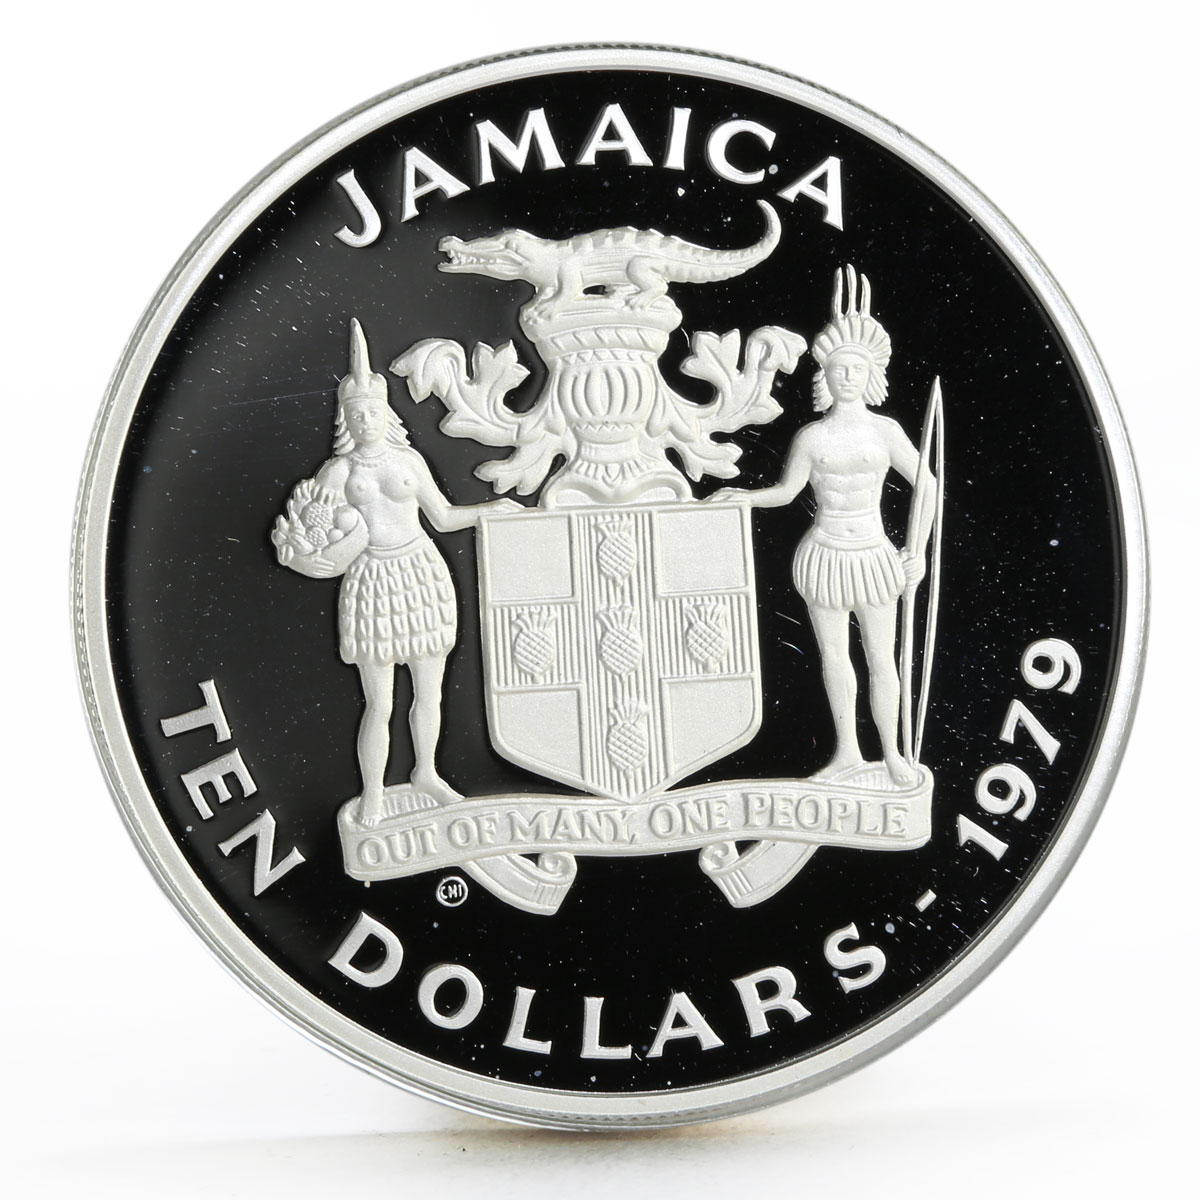 Jamaica 10 dollars International Year of the Child proof silver coin 1979